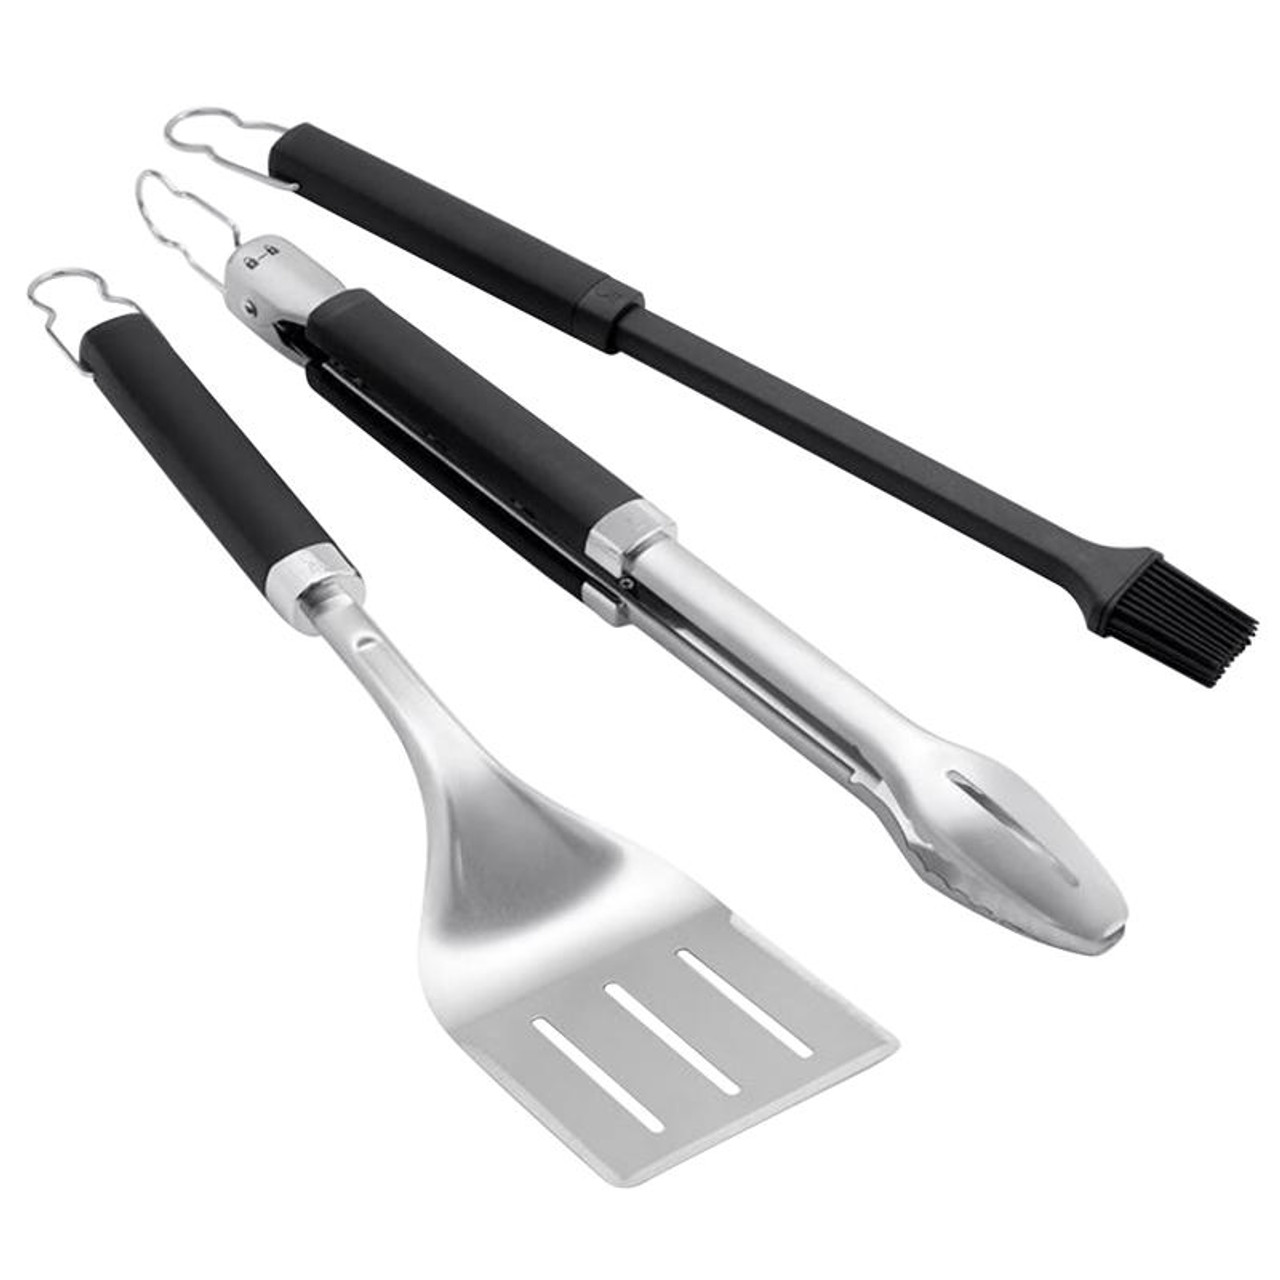 Weber Soft Rubber Grip Stainless Steel 2-Piece Barbeque Tool Set